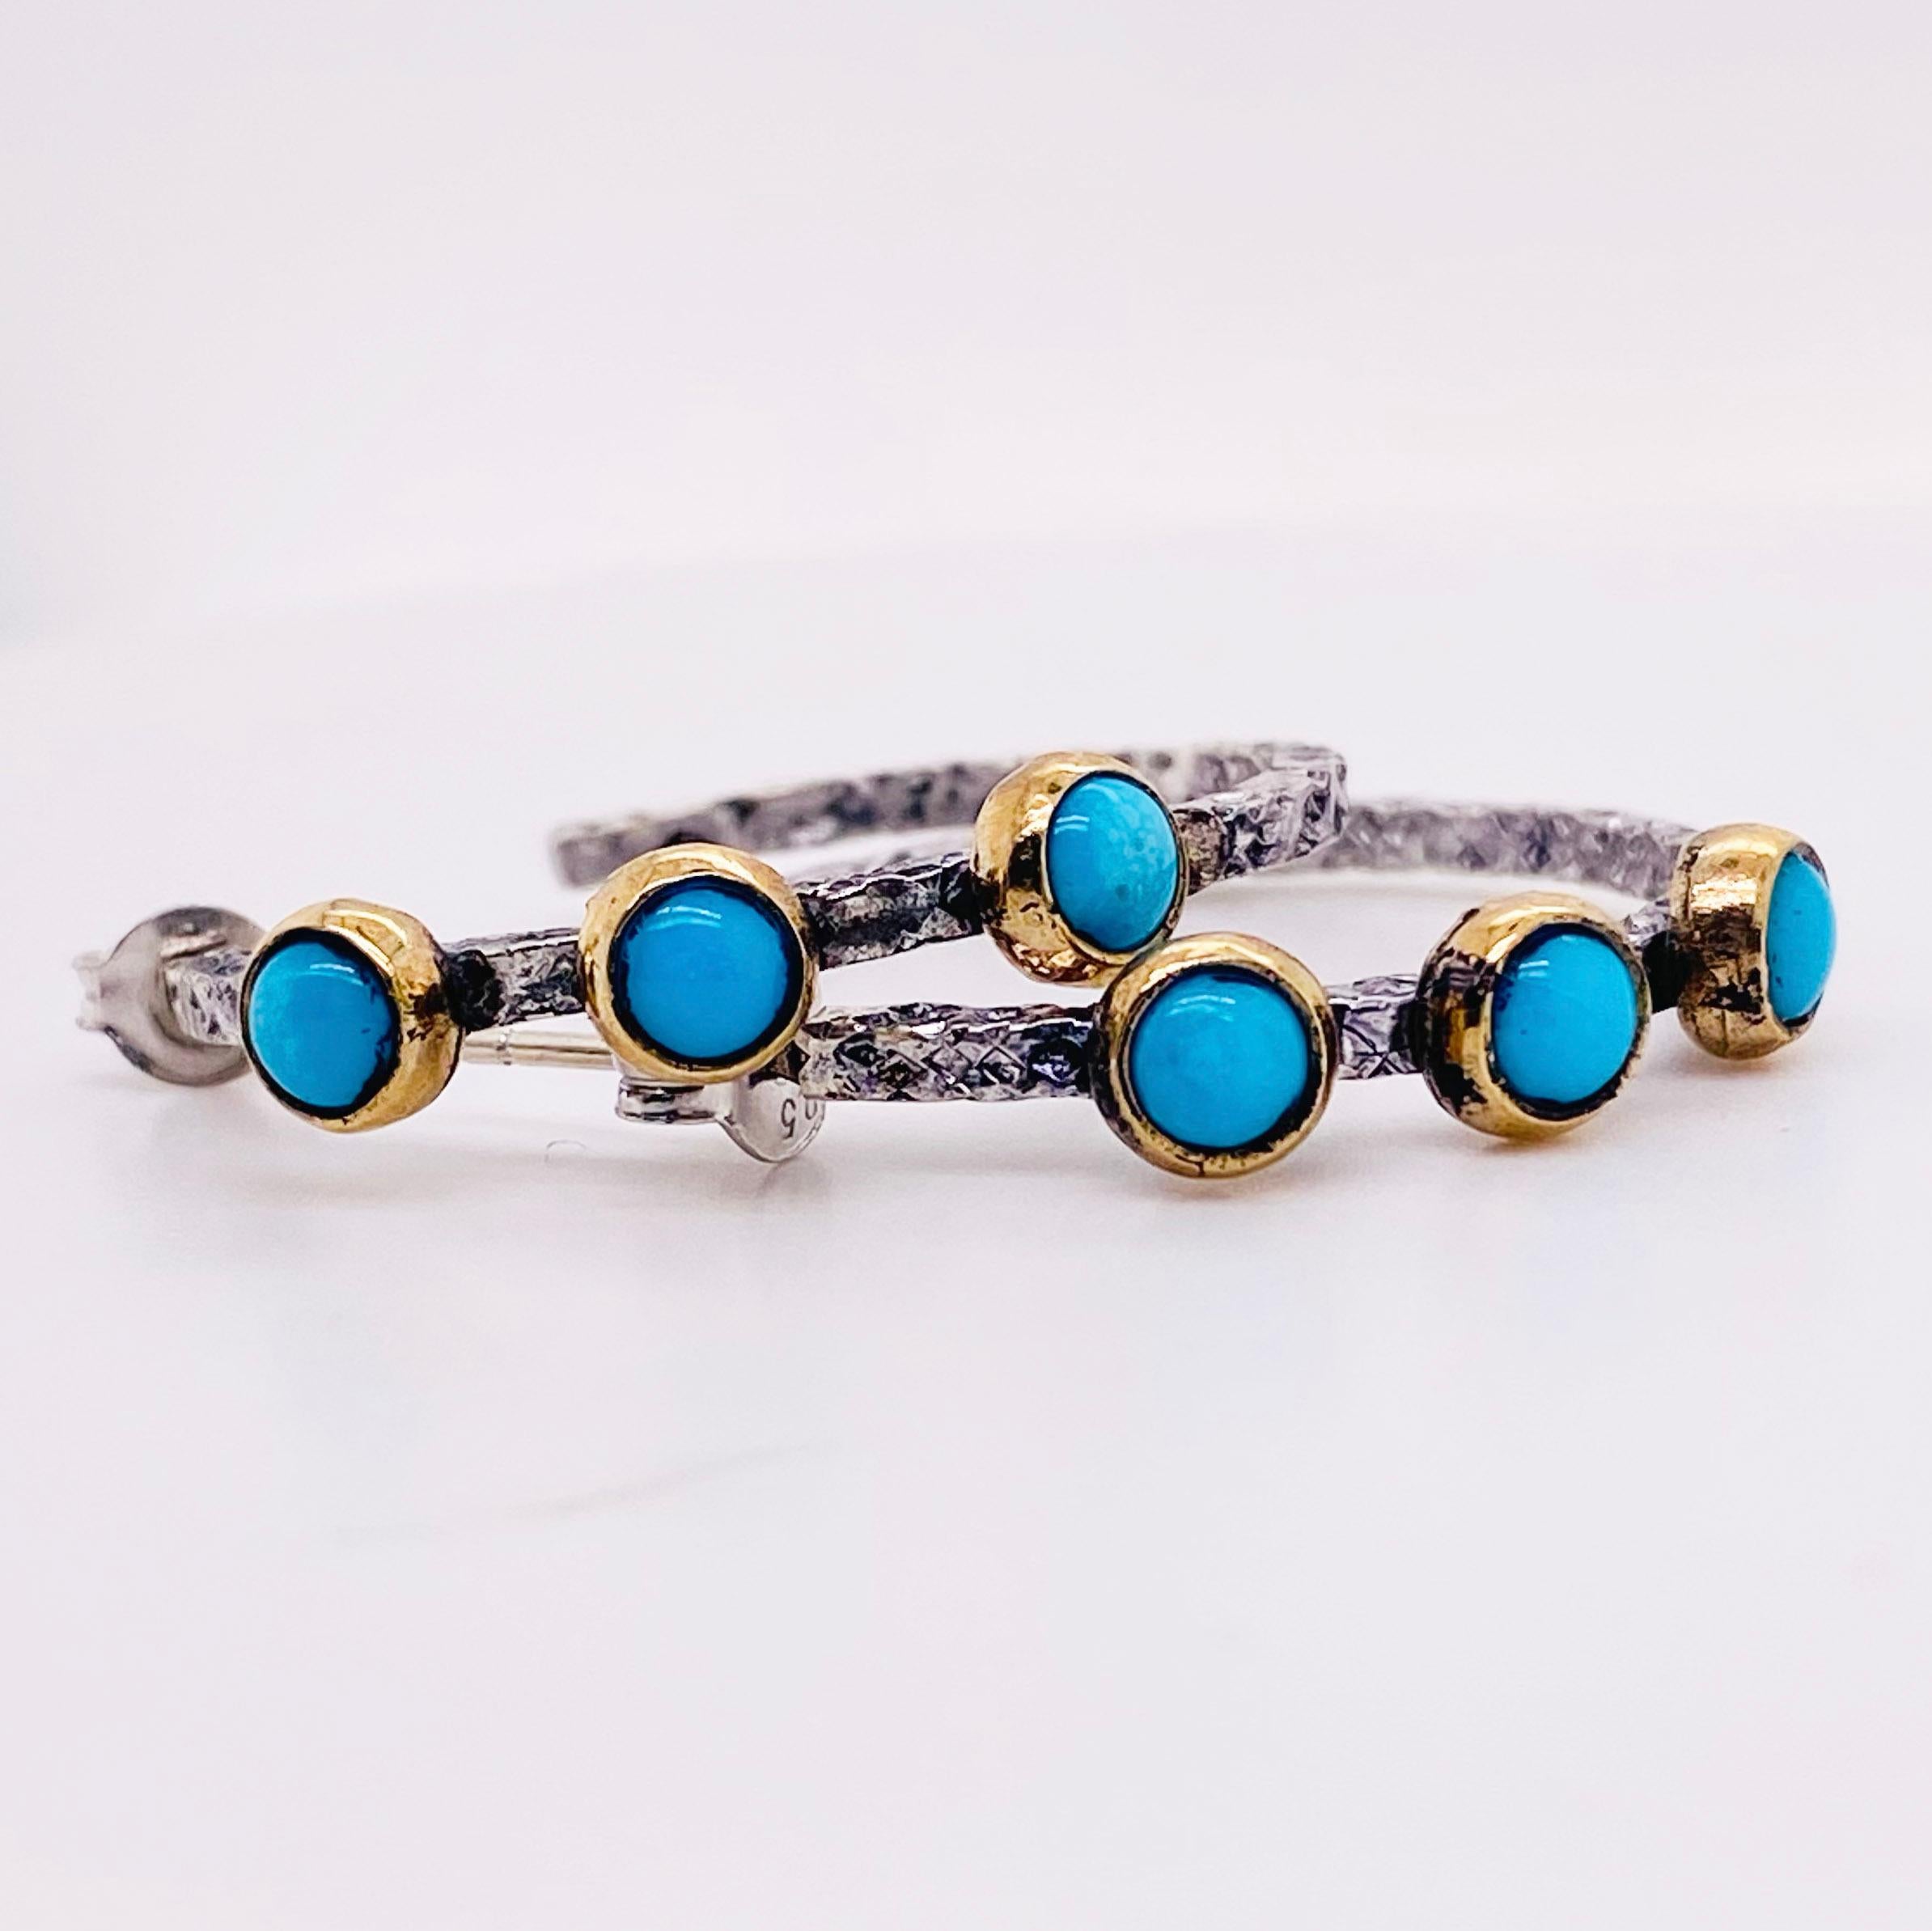 Metal Quality: Mixed Metals and Gold
Earring Type: Hoop 
Gemstone: Turquoise 
Gemstone Color:  Blue
Diameter: 5.3 mm 
Band Width: 2 mm 
Post Type: Stud 